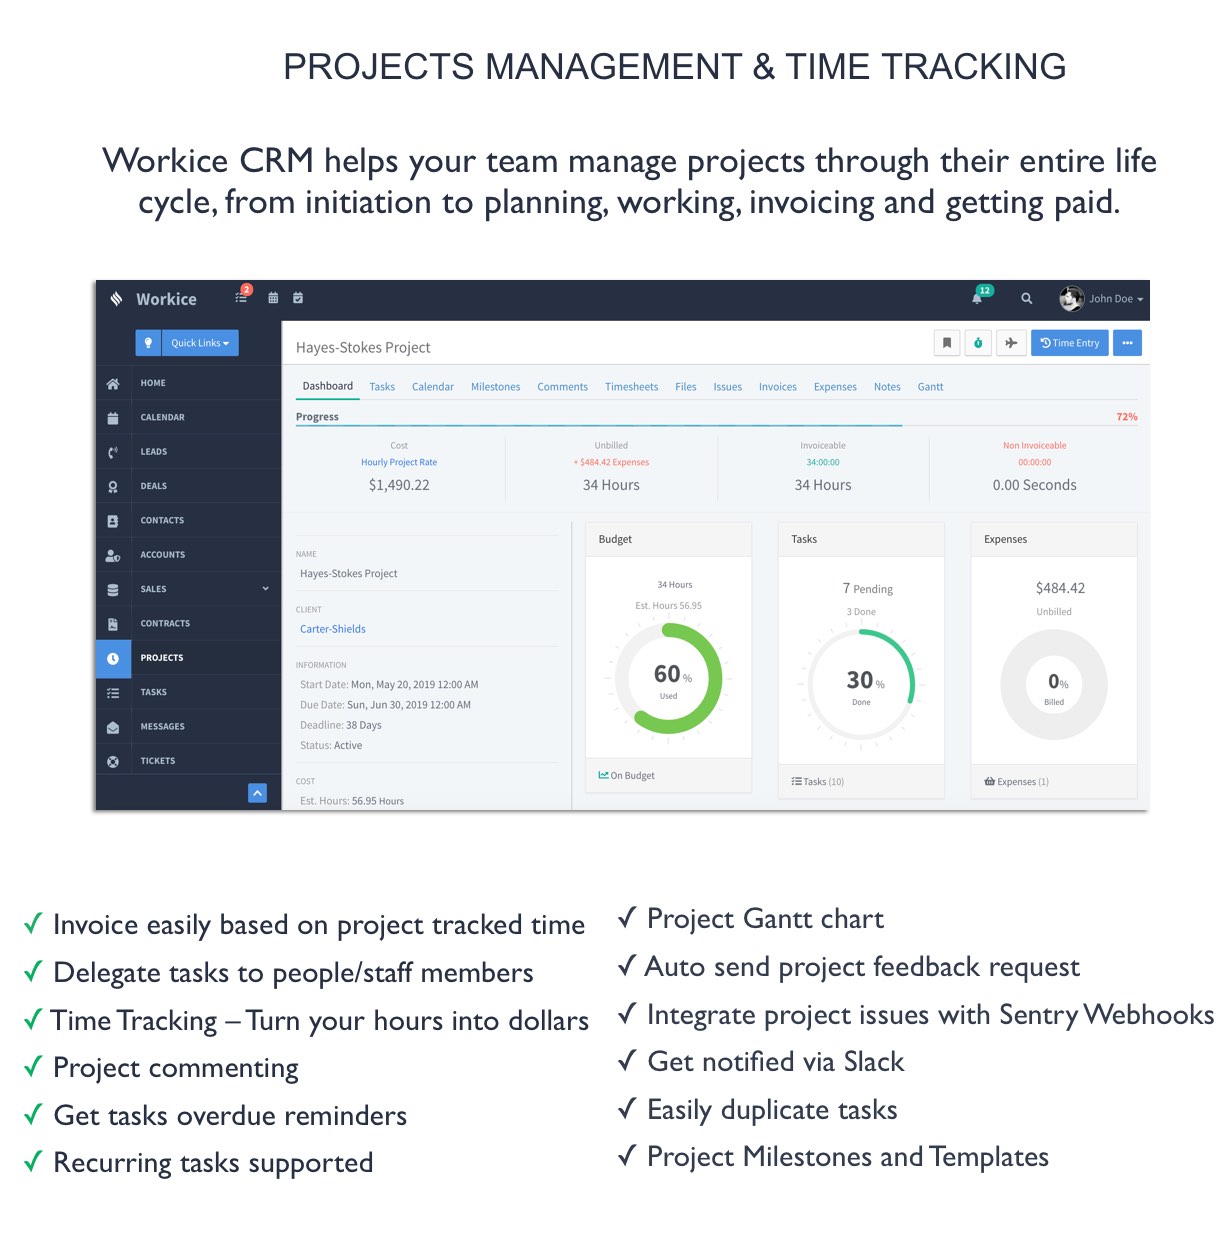 Projects management and time tracking